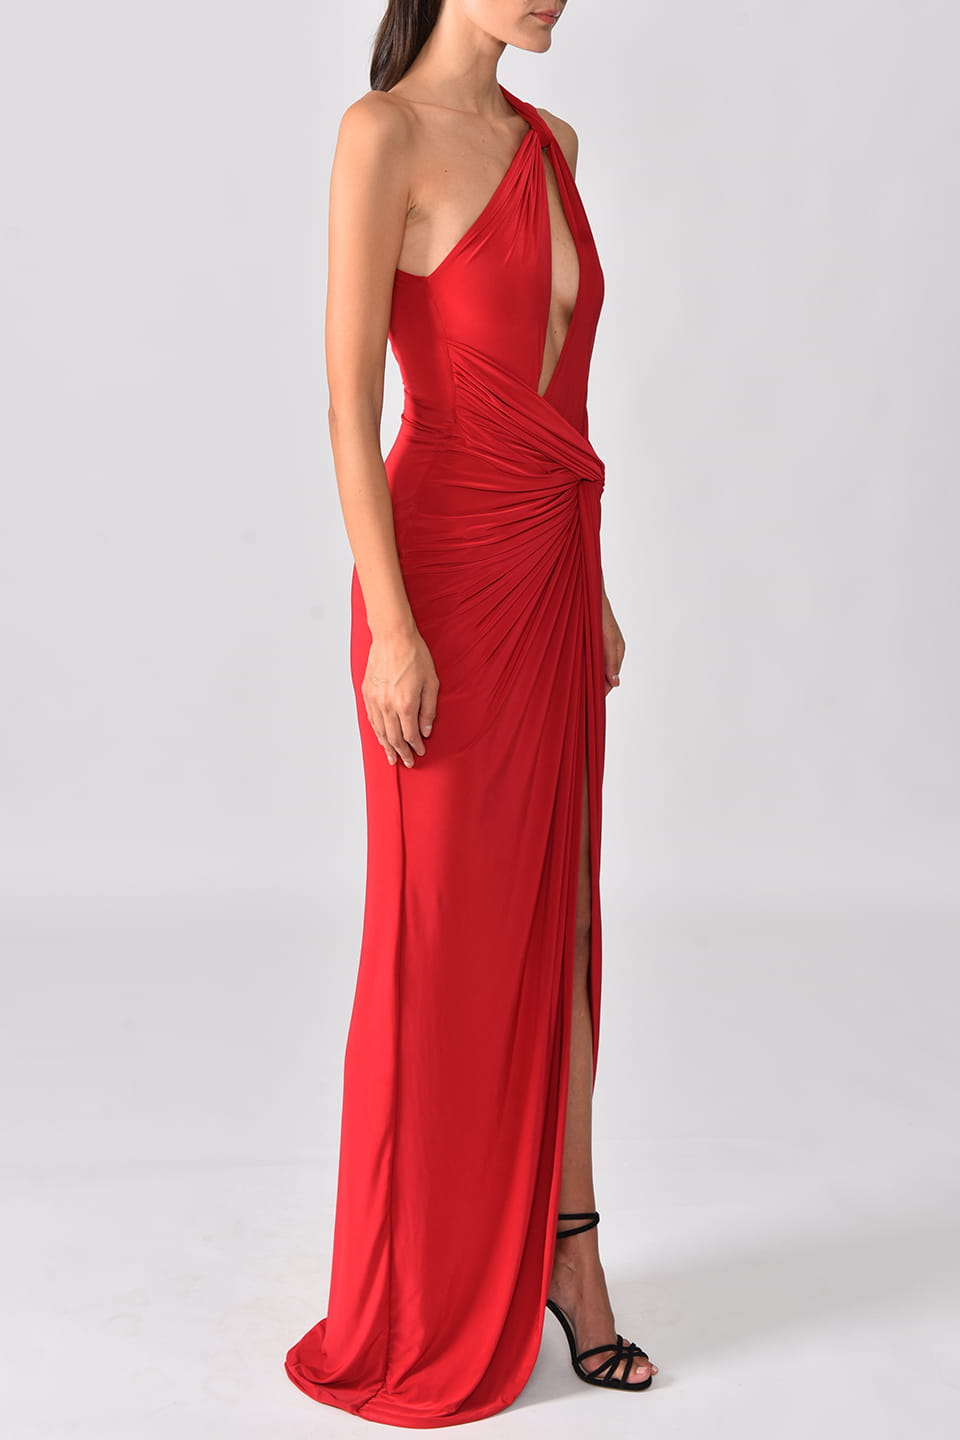 Model wearing one shoulder red maxi dress from stylist Hamel, posing on right side